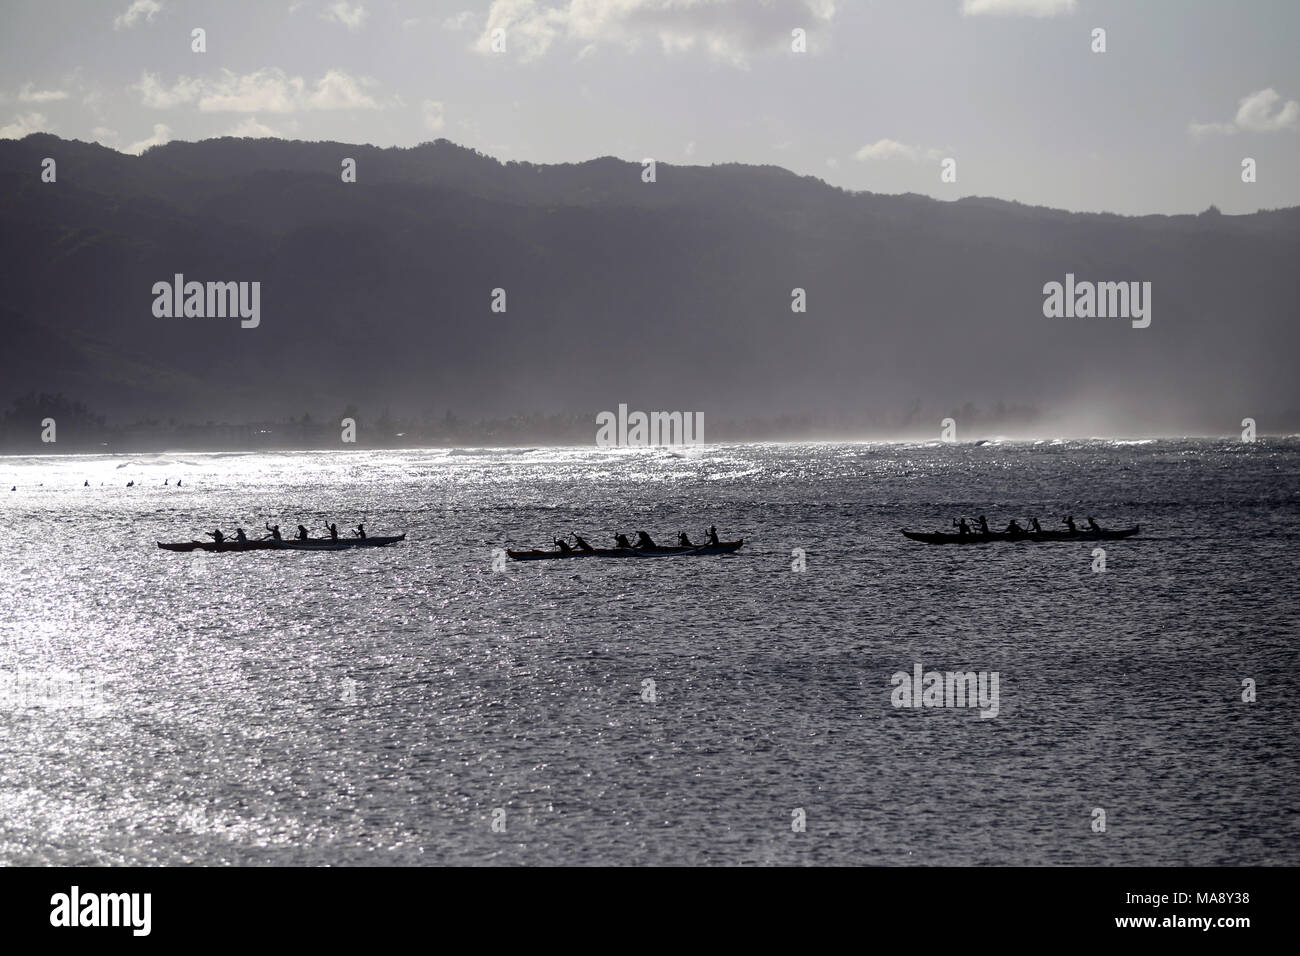 Outrigger canoes on the North Shore of Oahu near Haleiwa. Stock Photo